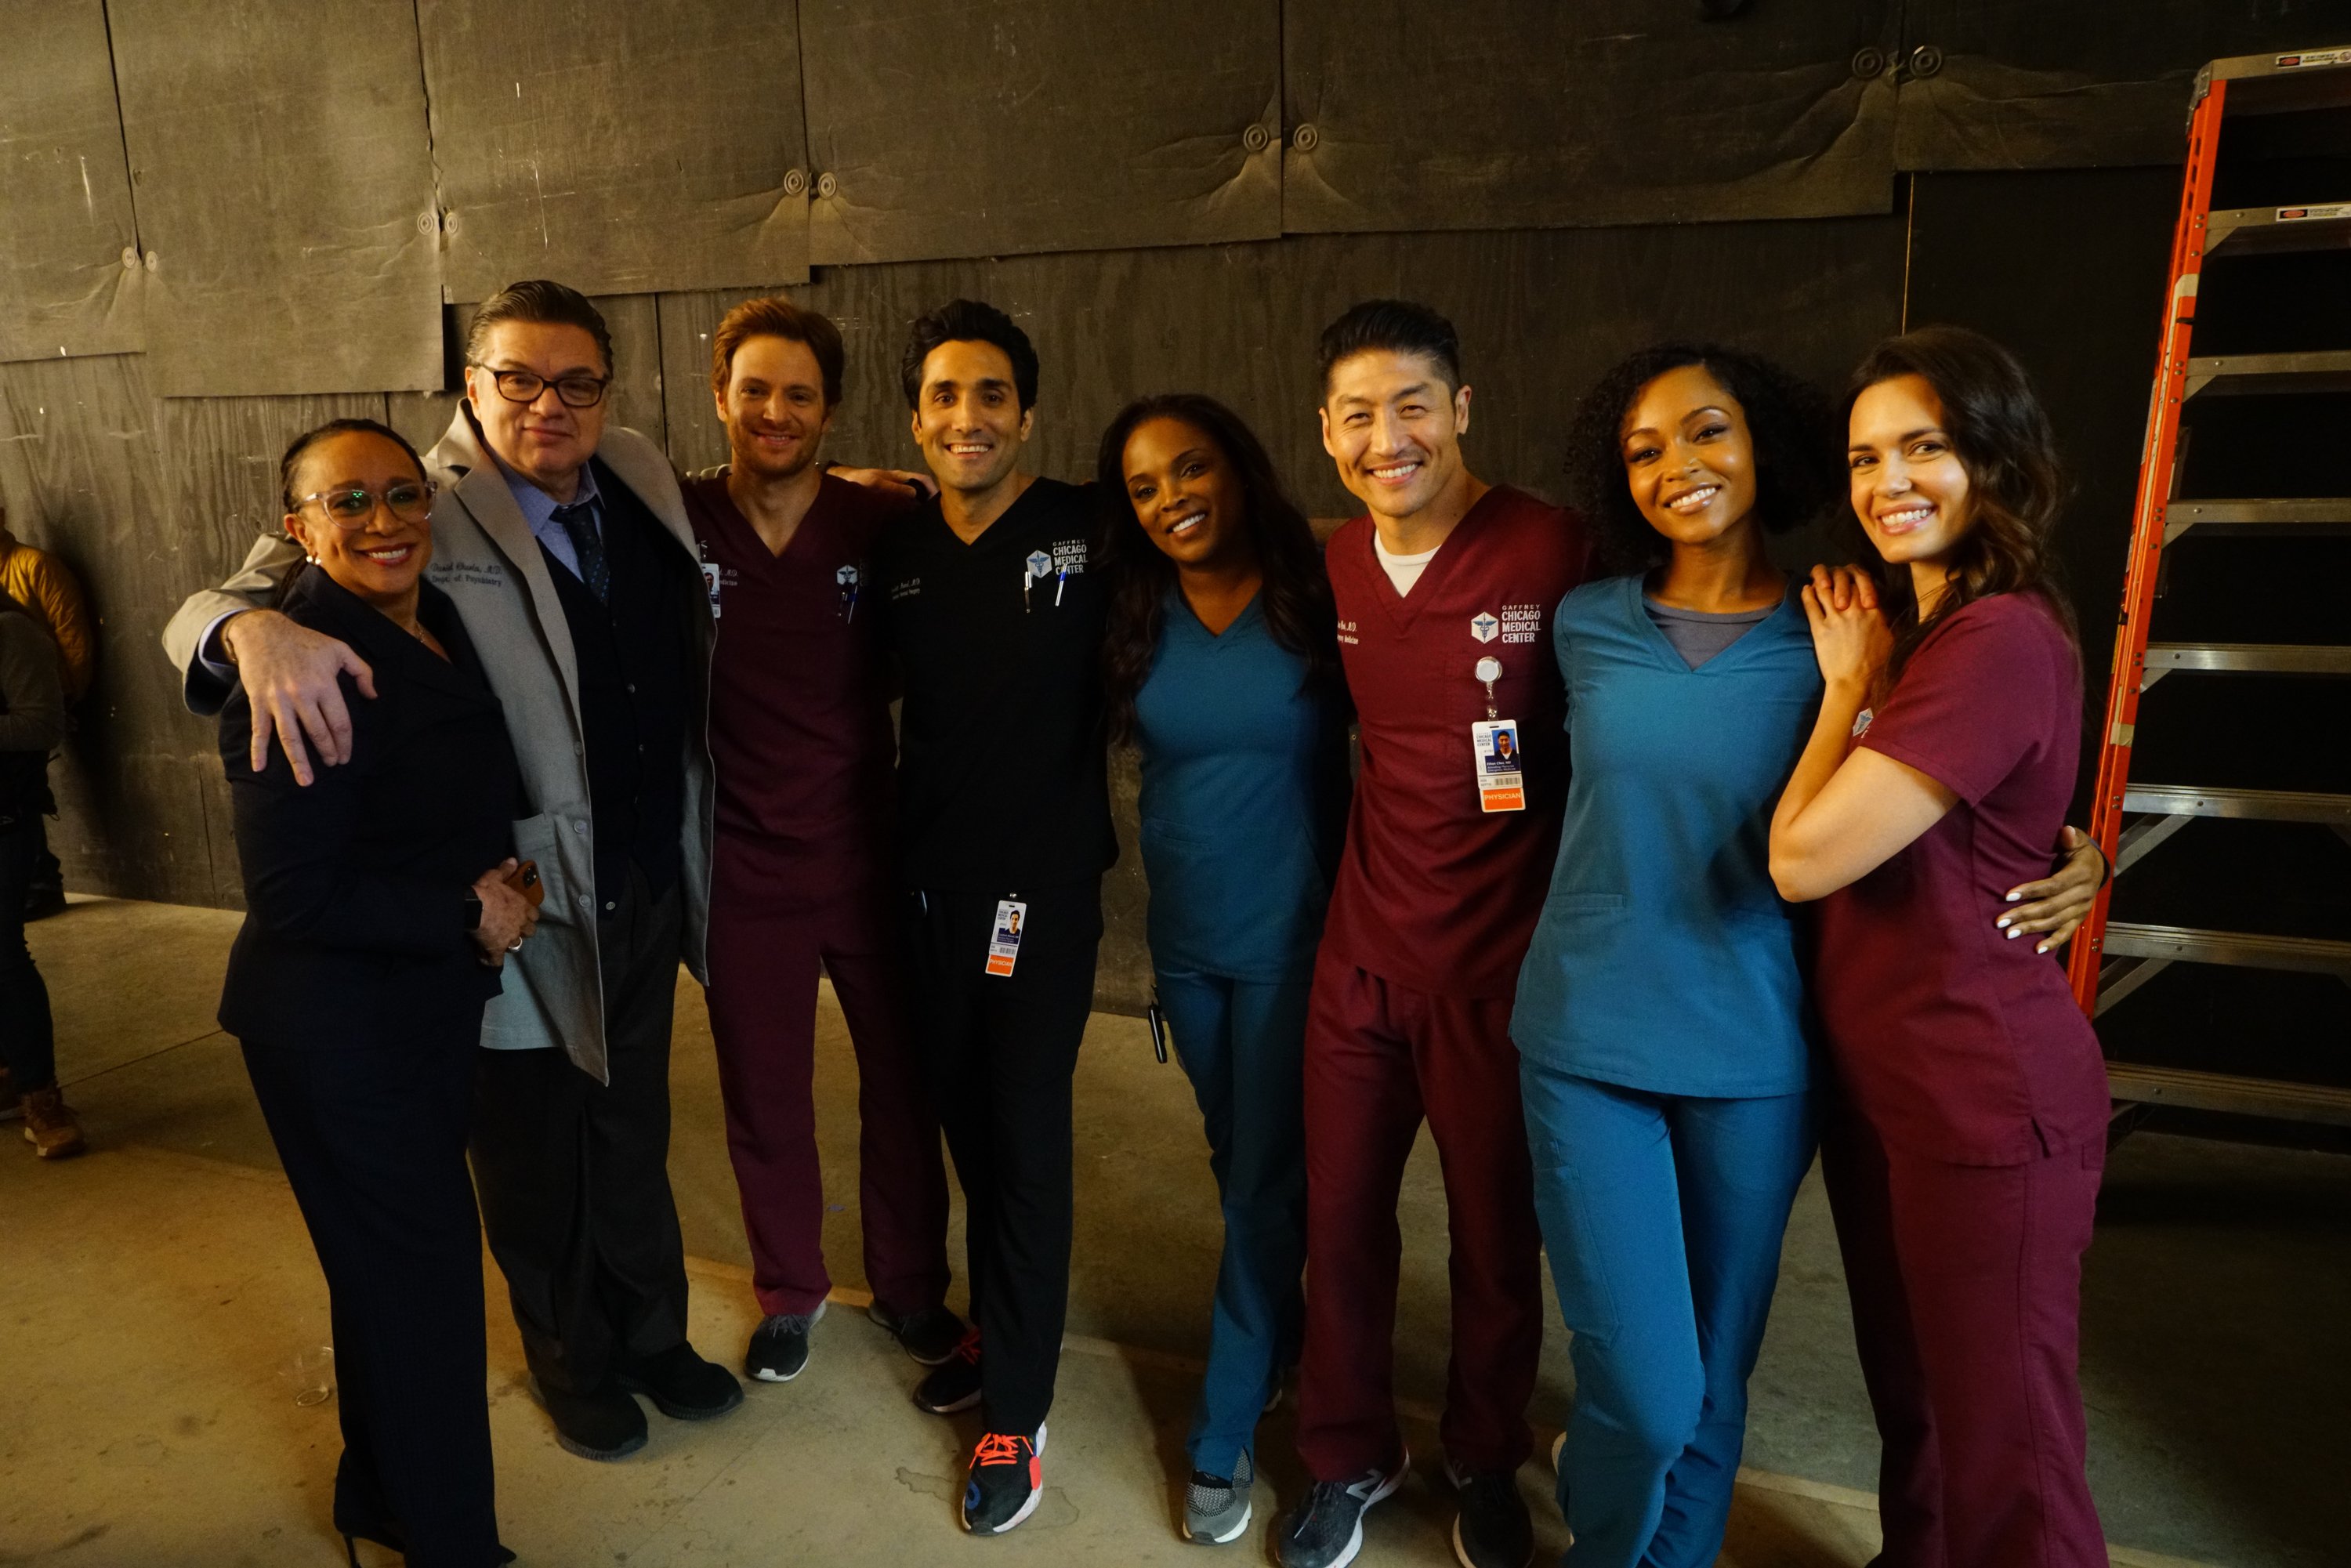 The cast of Chicago Med poses together. 